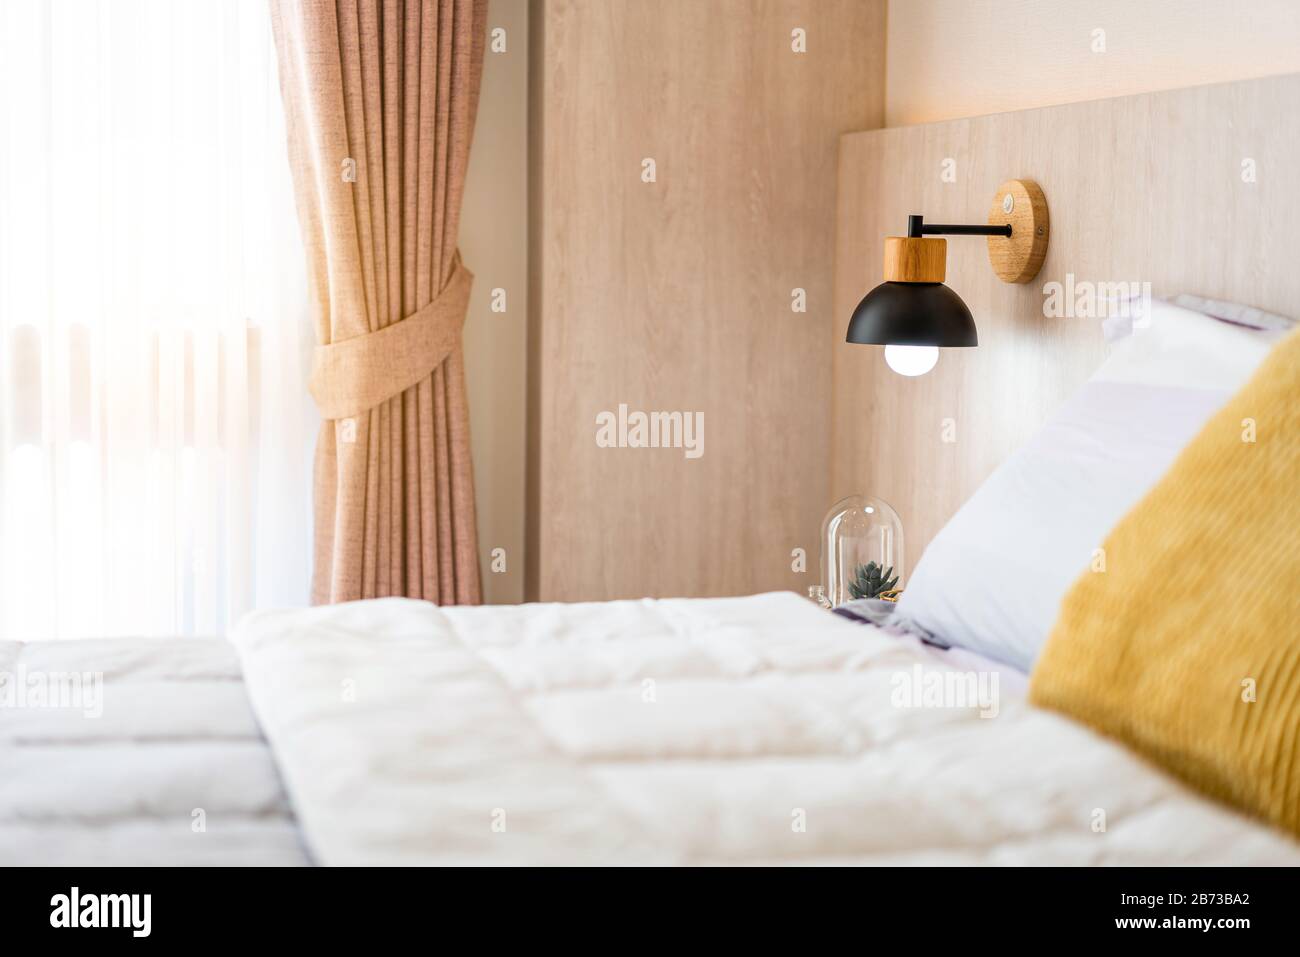 Stylish wooden, black color bedside lamp, wooden bed and grey blanket in the bedroom. Comfortable and elegant interior design for a cozy atmosphere. Stock Photo